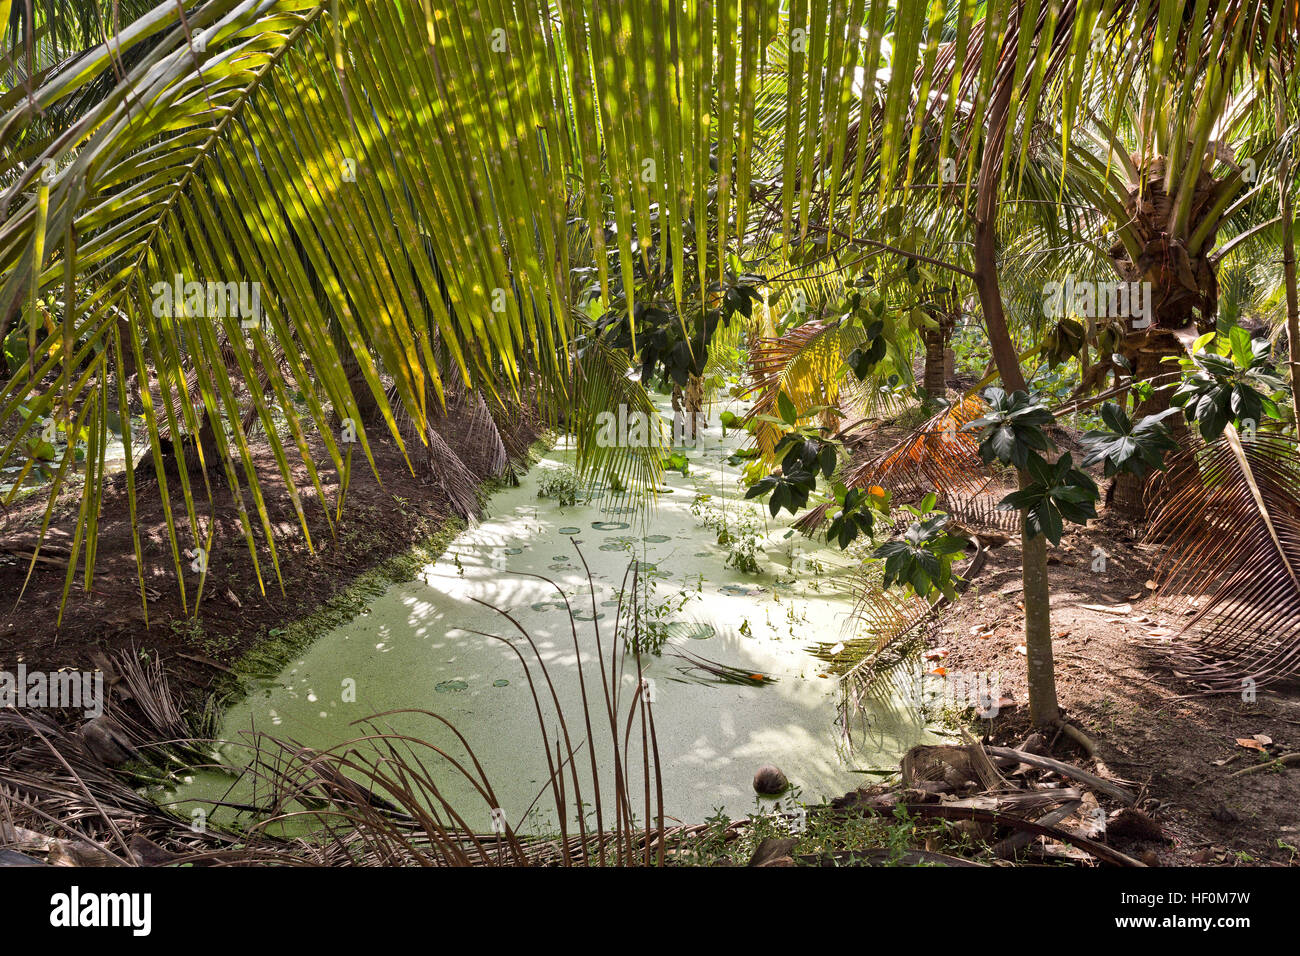 Green algae floats on the surface of an irrigation canal in a coconut cultivation area near Bangkok, Thailand Stock Photo